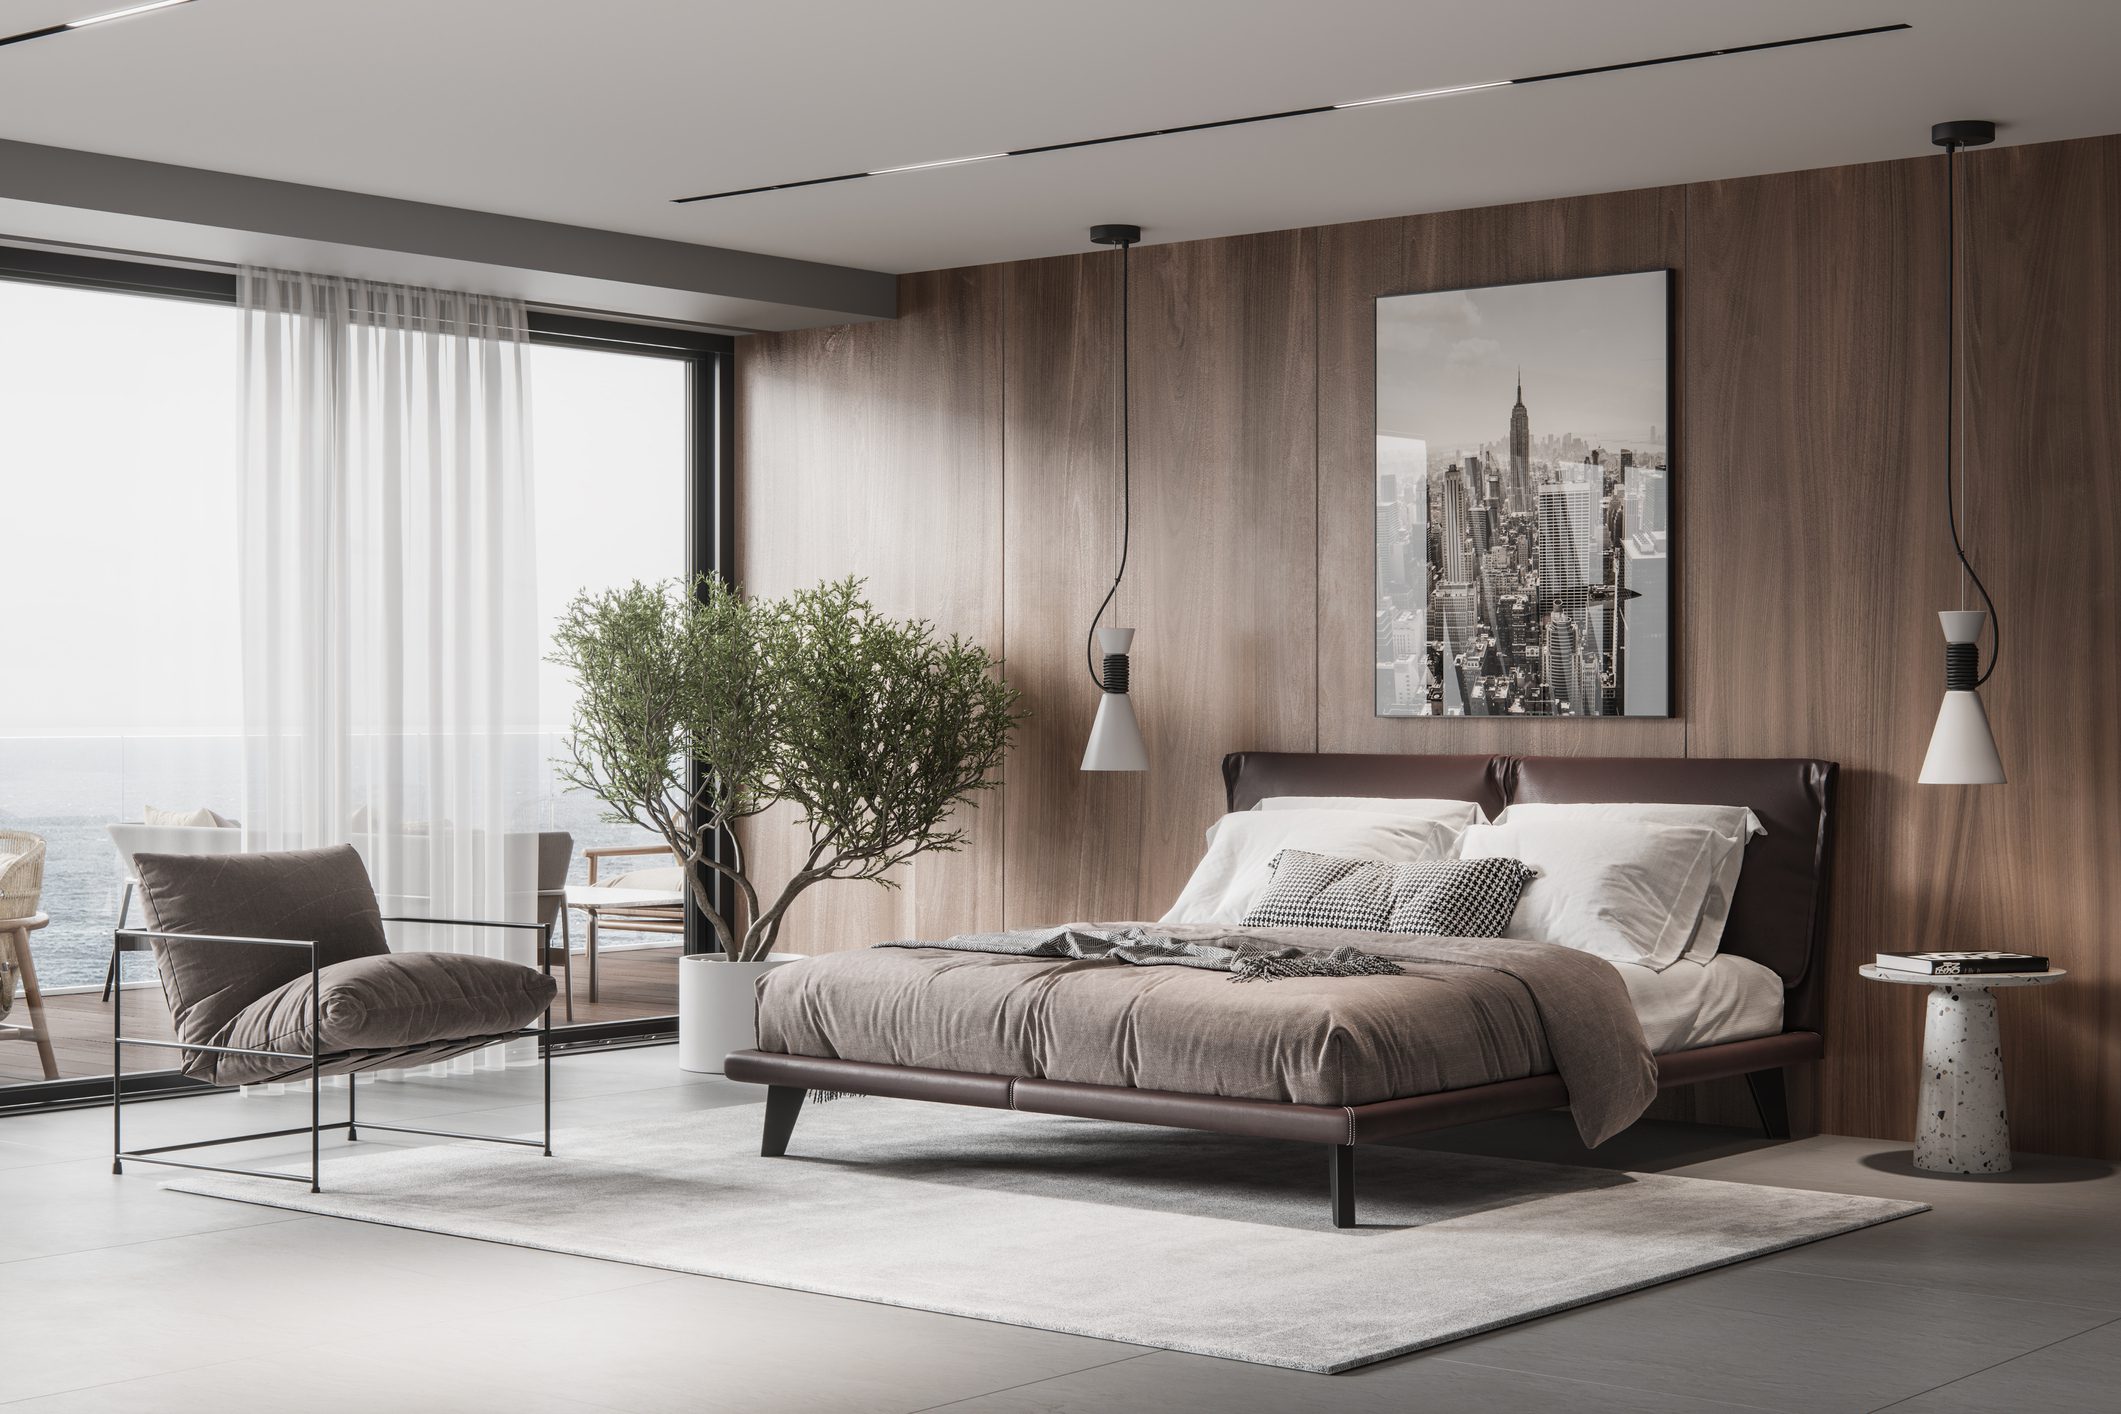 Stylish bedroom with a brown accent wall and floor to ceiling windows.